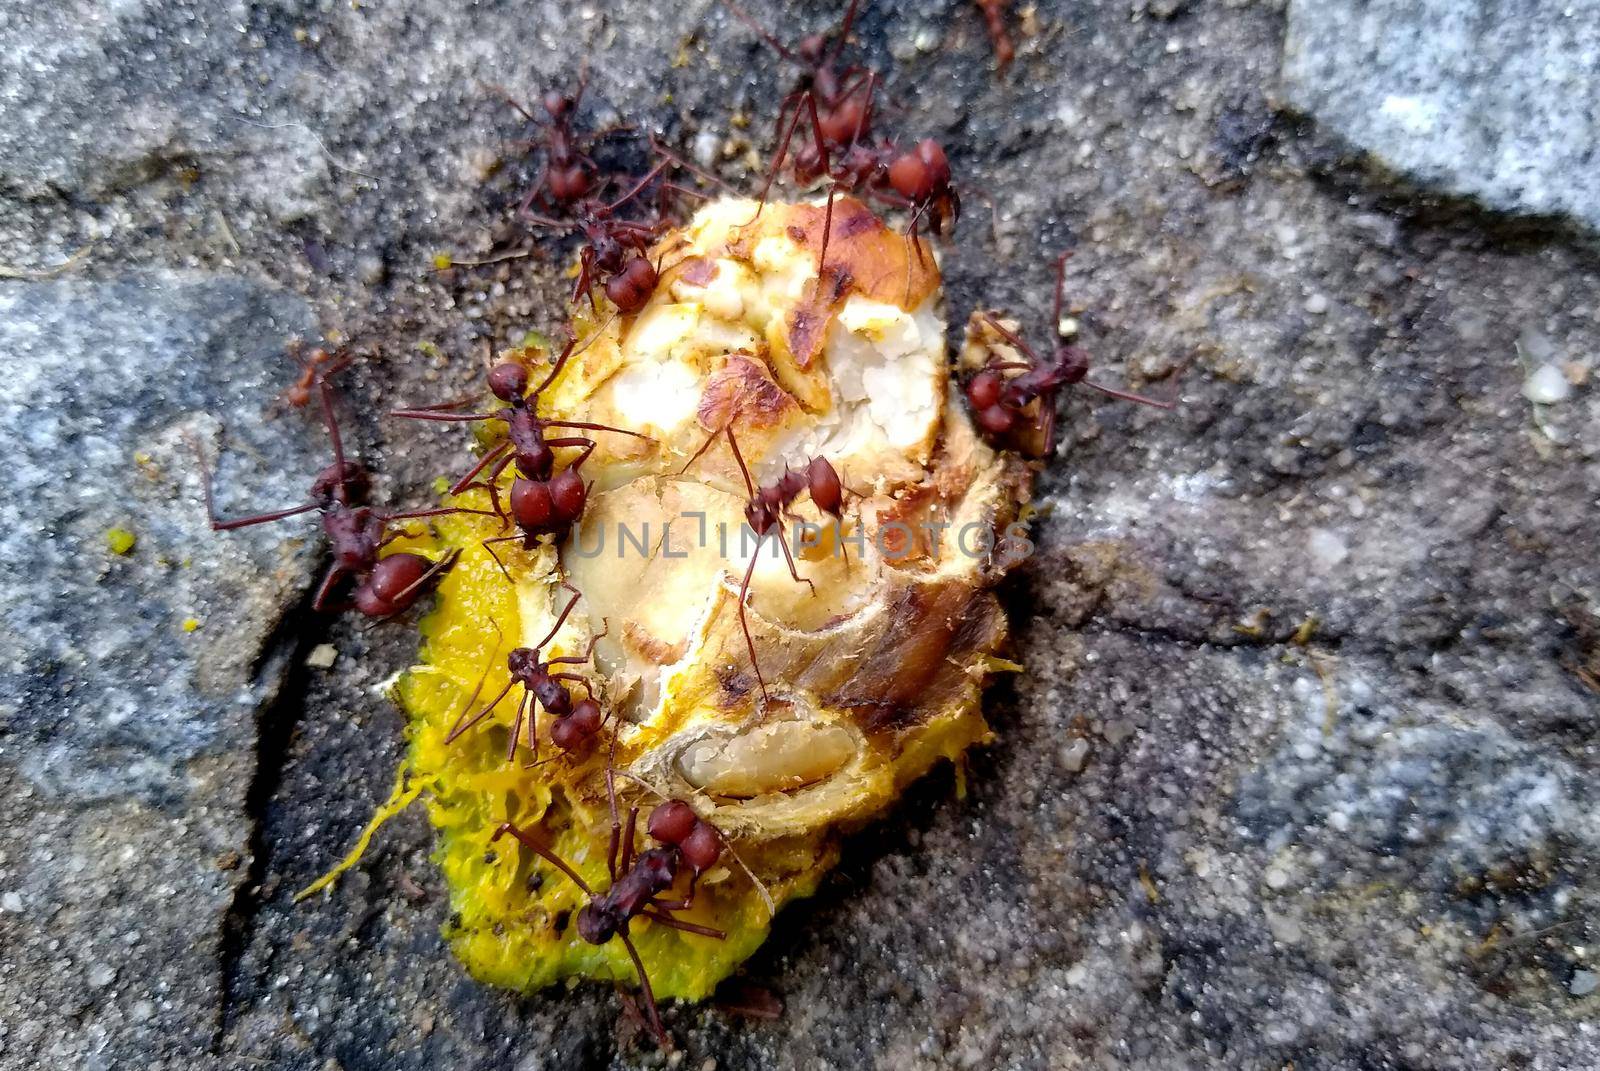 salvador, bahia, brazil - november 26, 2020: leaf-cutting ants are seen cutting a mango fruit in a garden in the city of Salvador.